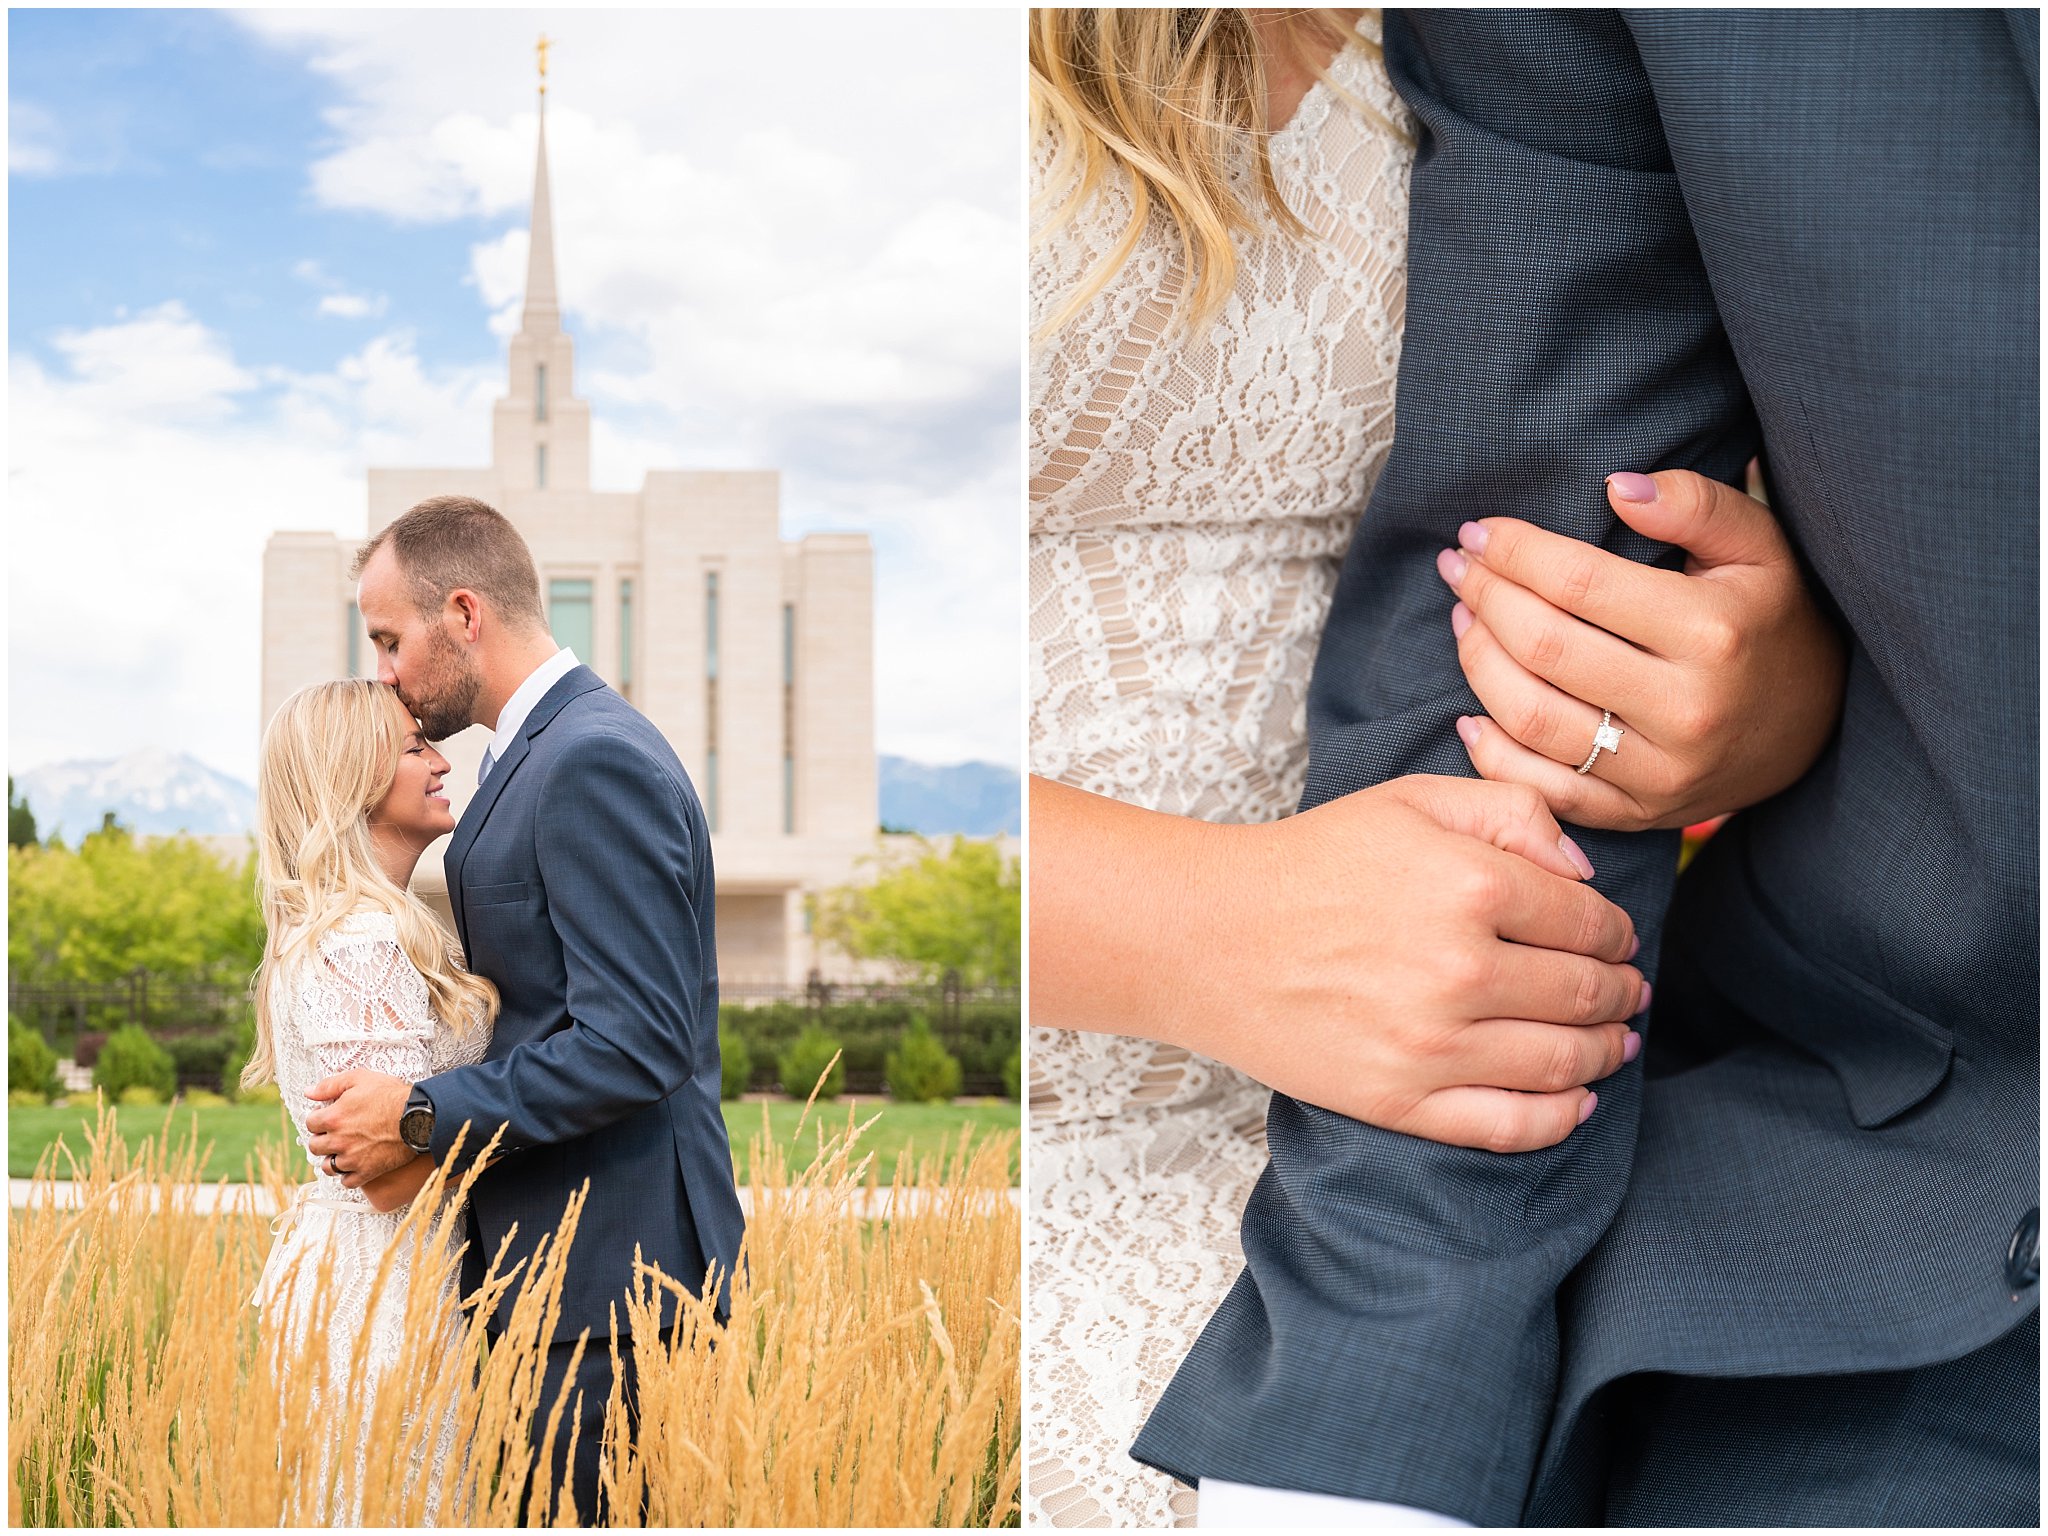 Couple portraits at the Oquirrh Mountain temple | Summer Carnival and Oquirrh Mountain Temple Wedding | Jessie and Dallin Photography